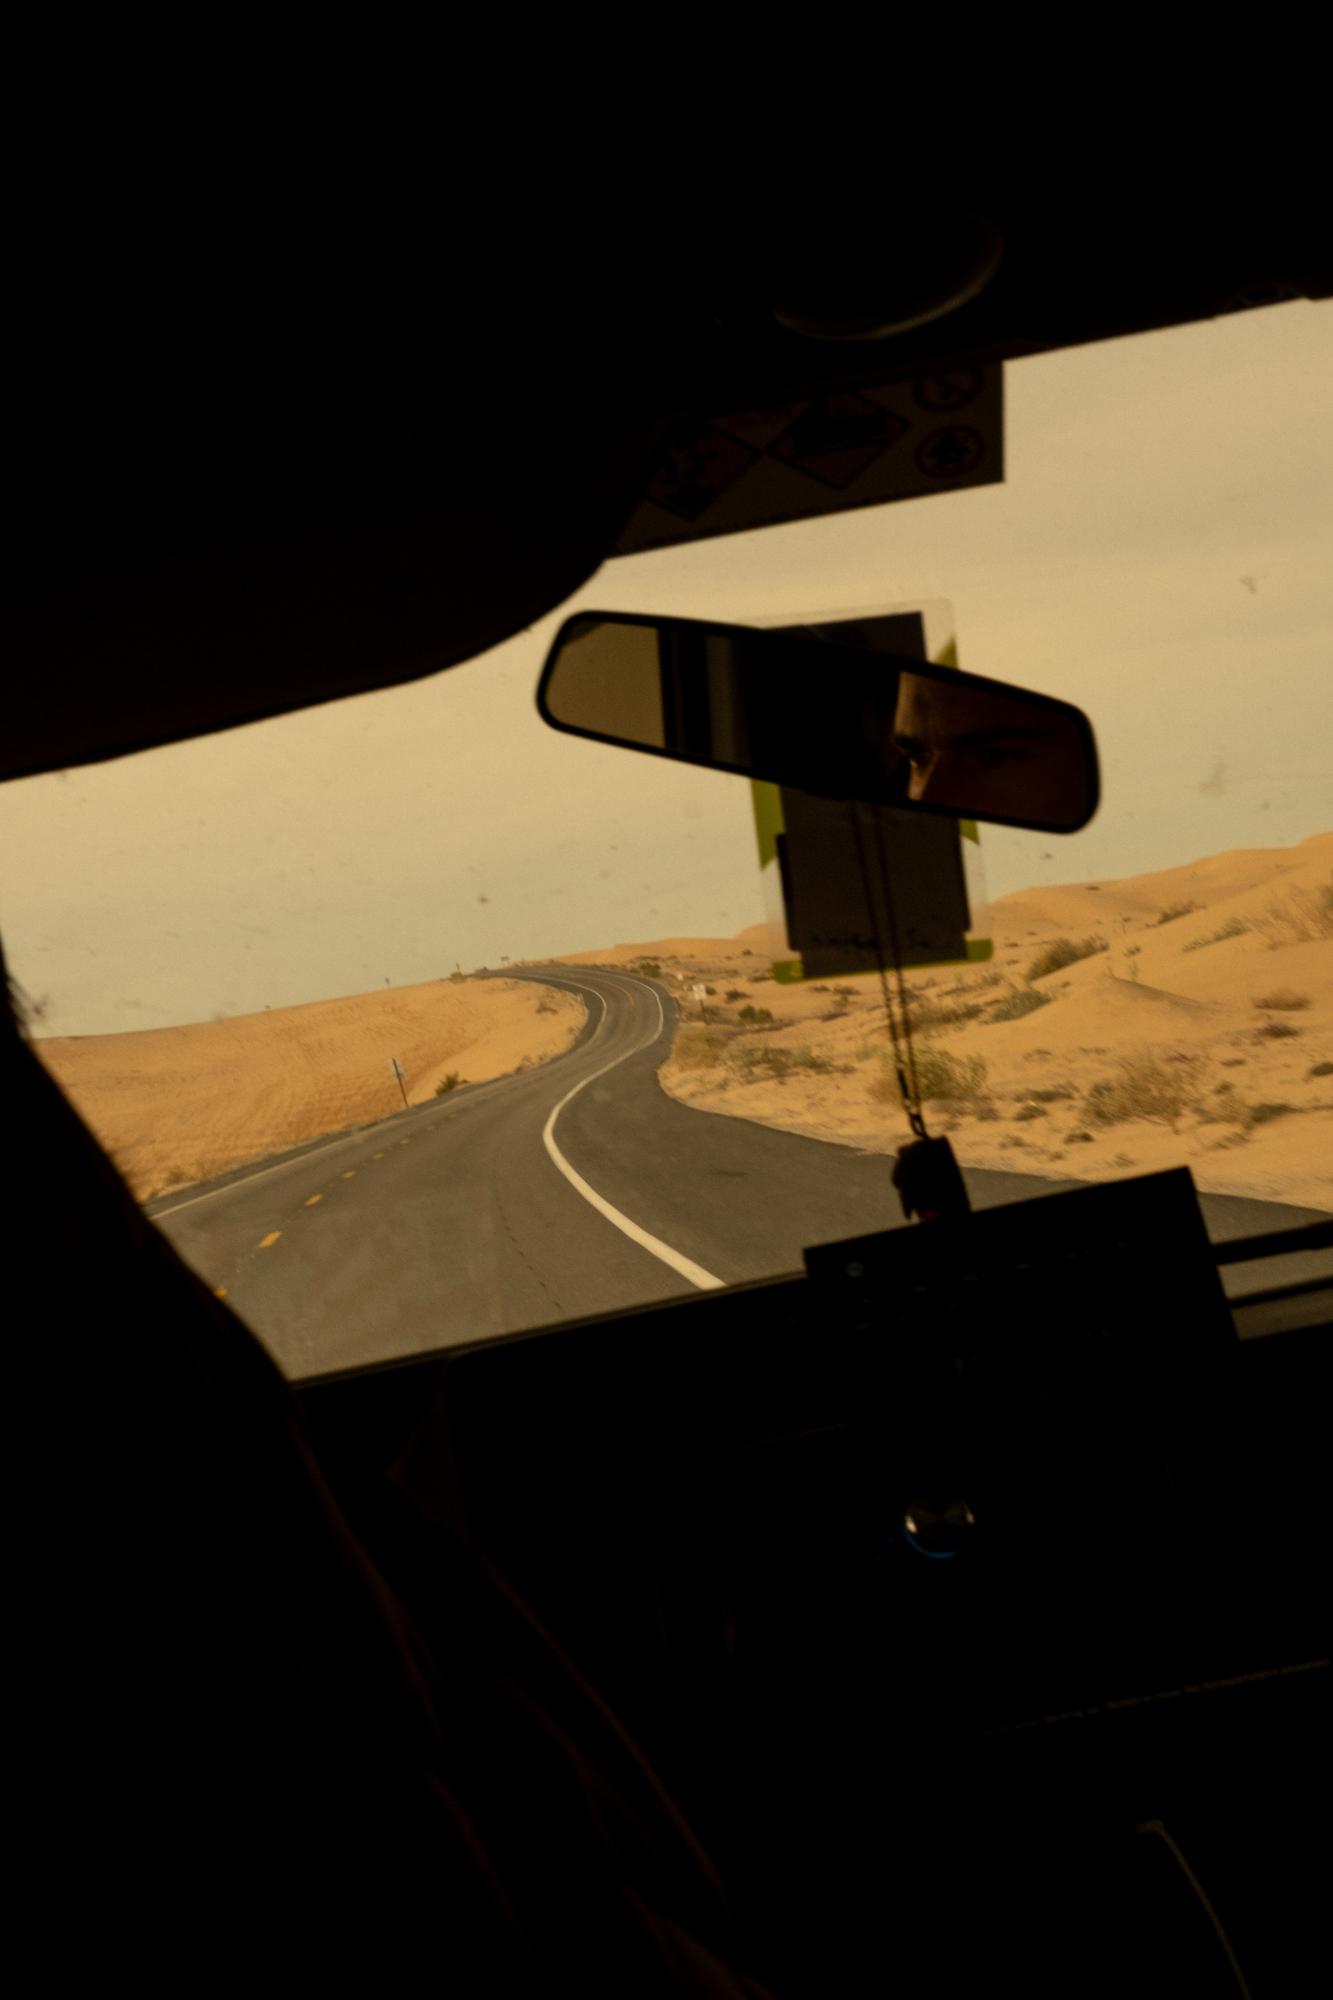 A Warm Winter (An Ongoing Journey) - Driving along the Imperial Sand Dunes on New Year's Eve....